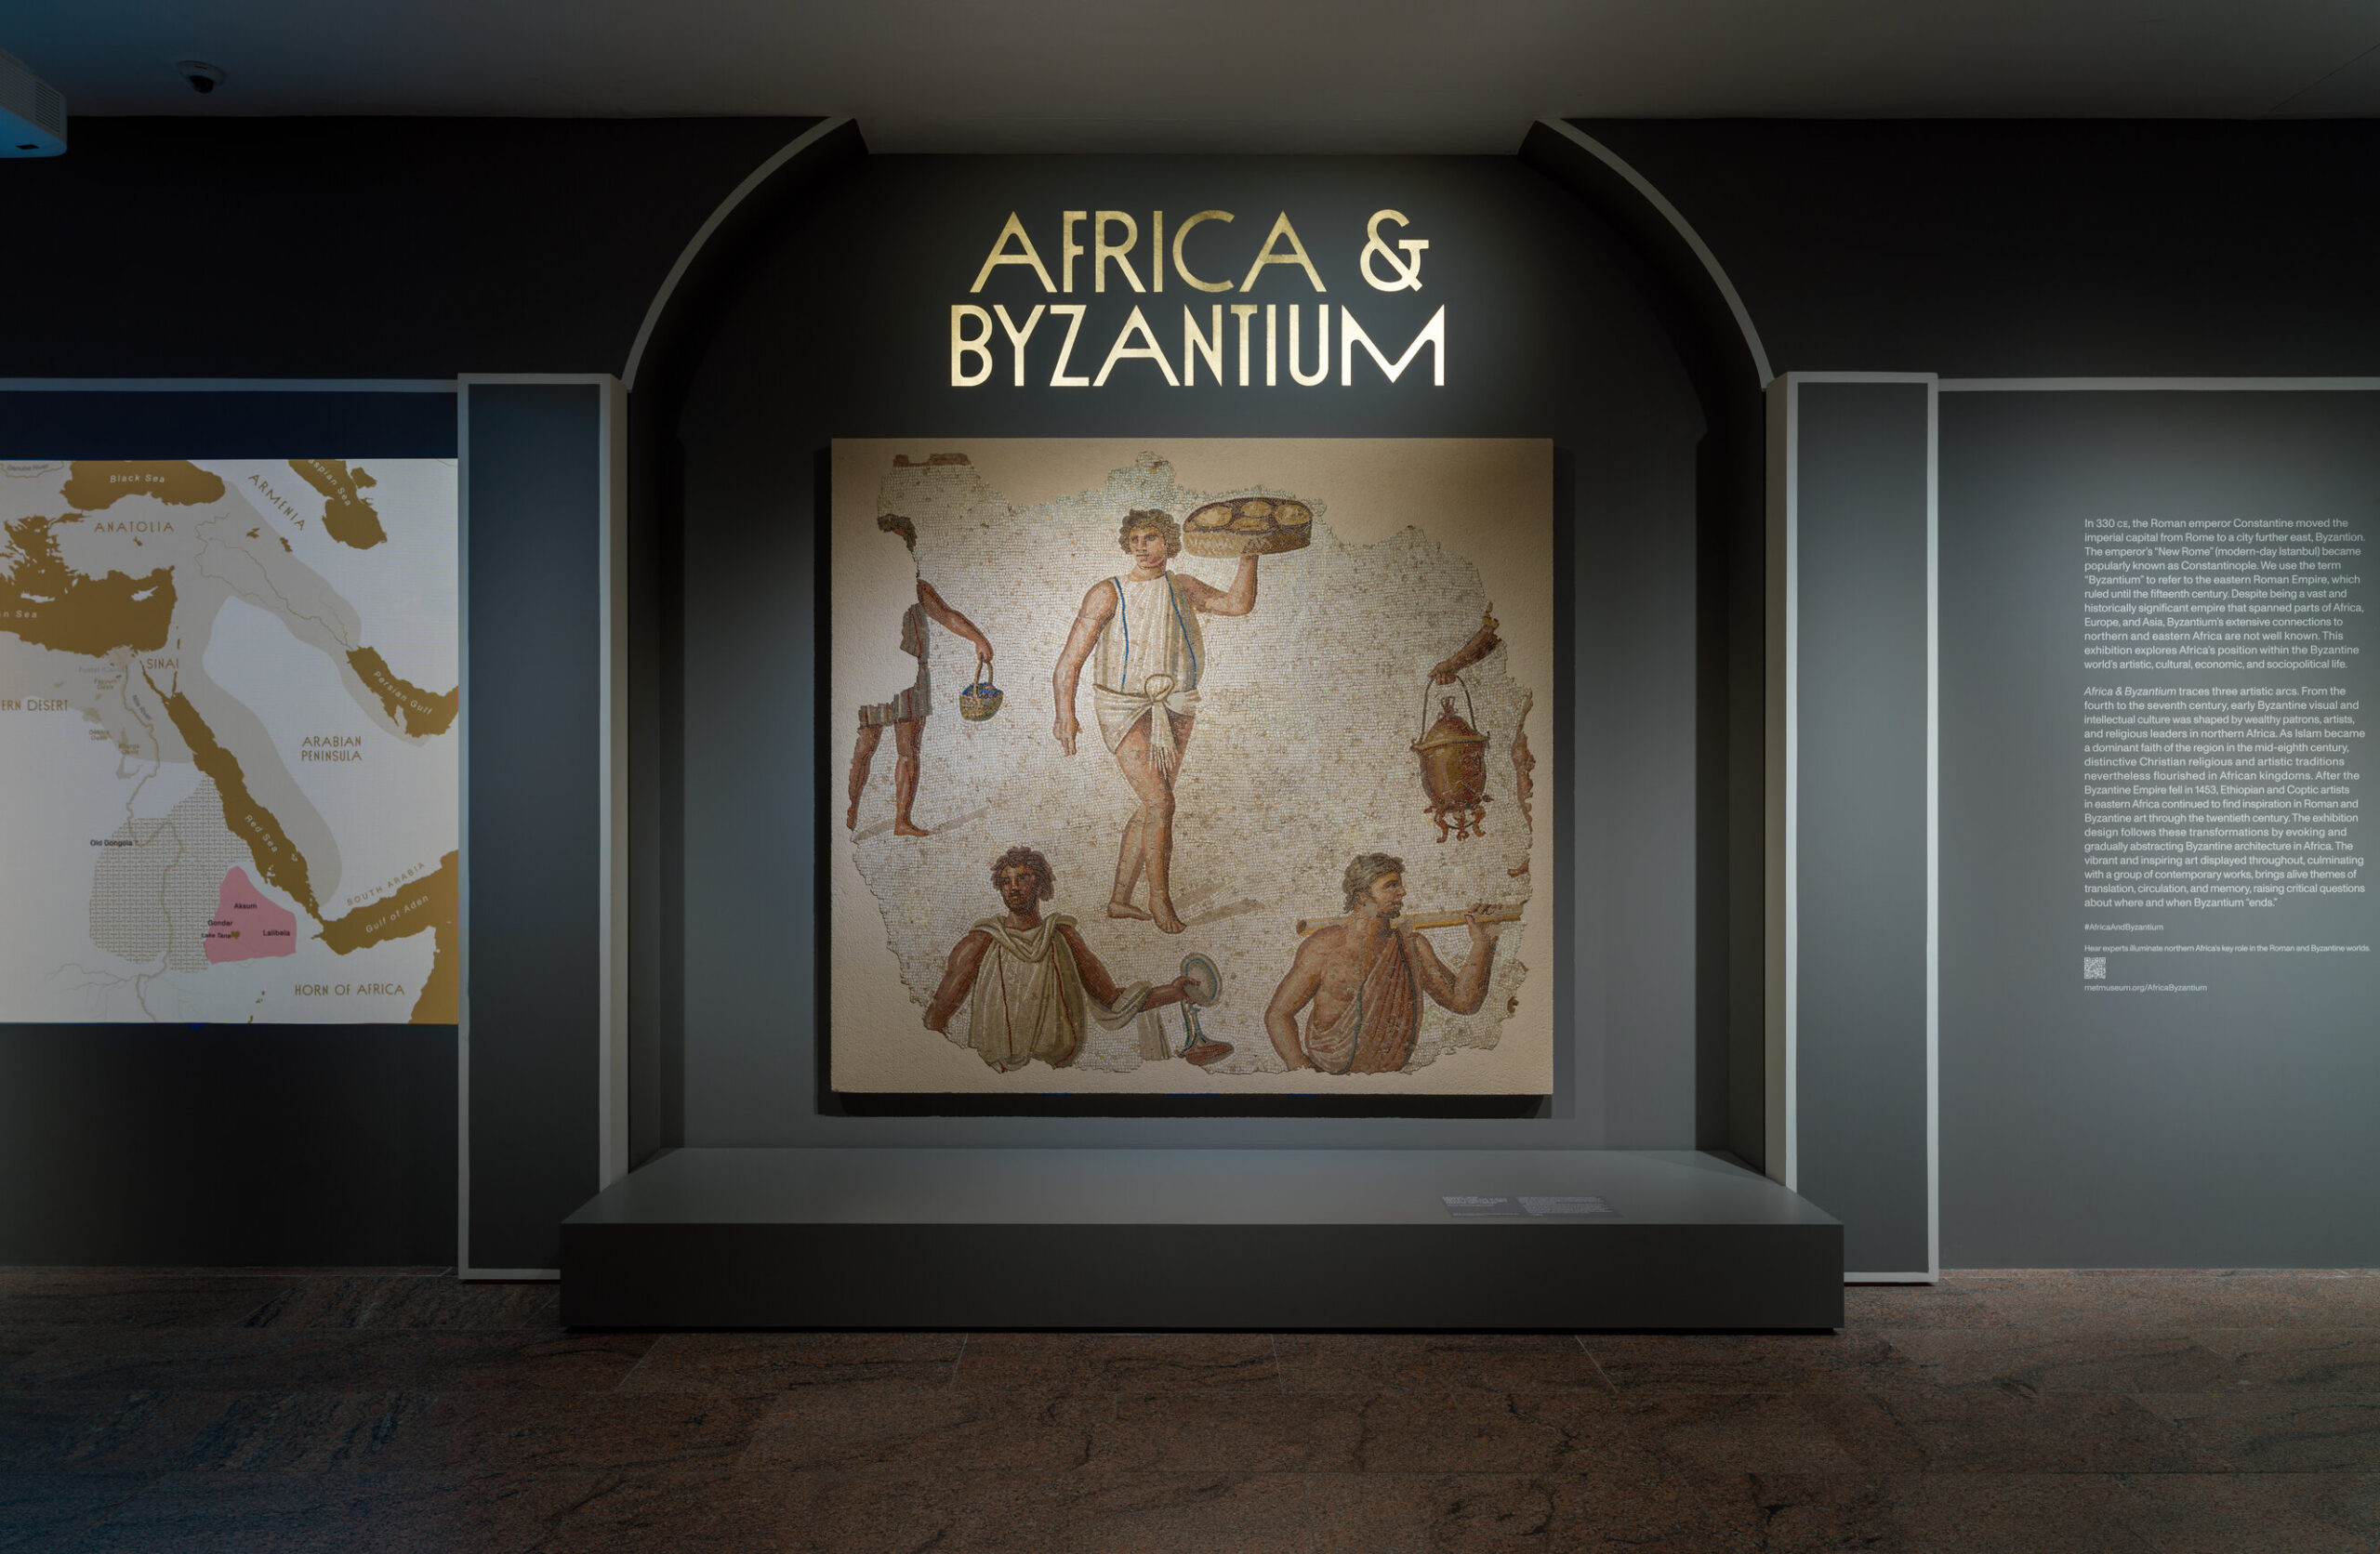 Major exhibition on Africa & Byzantium set to begin at The Met